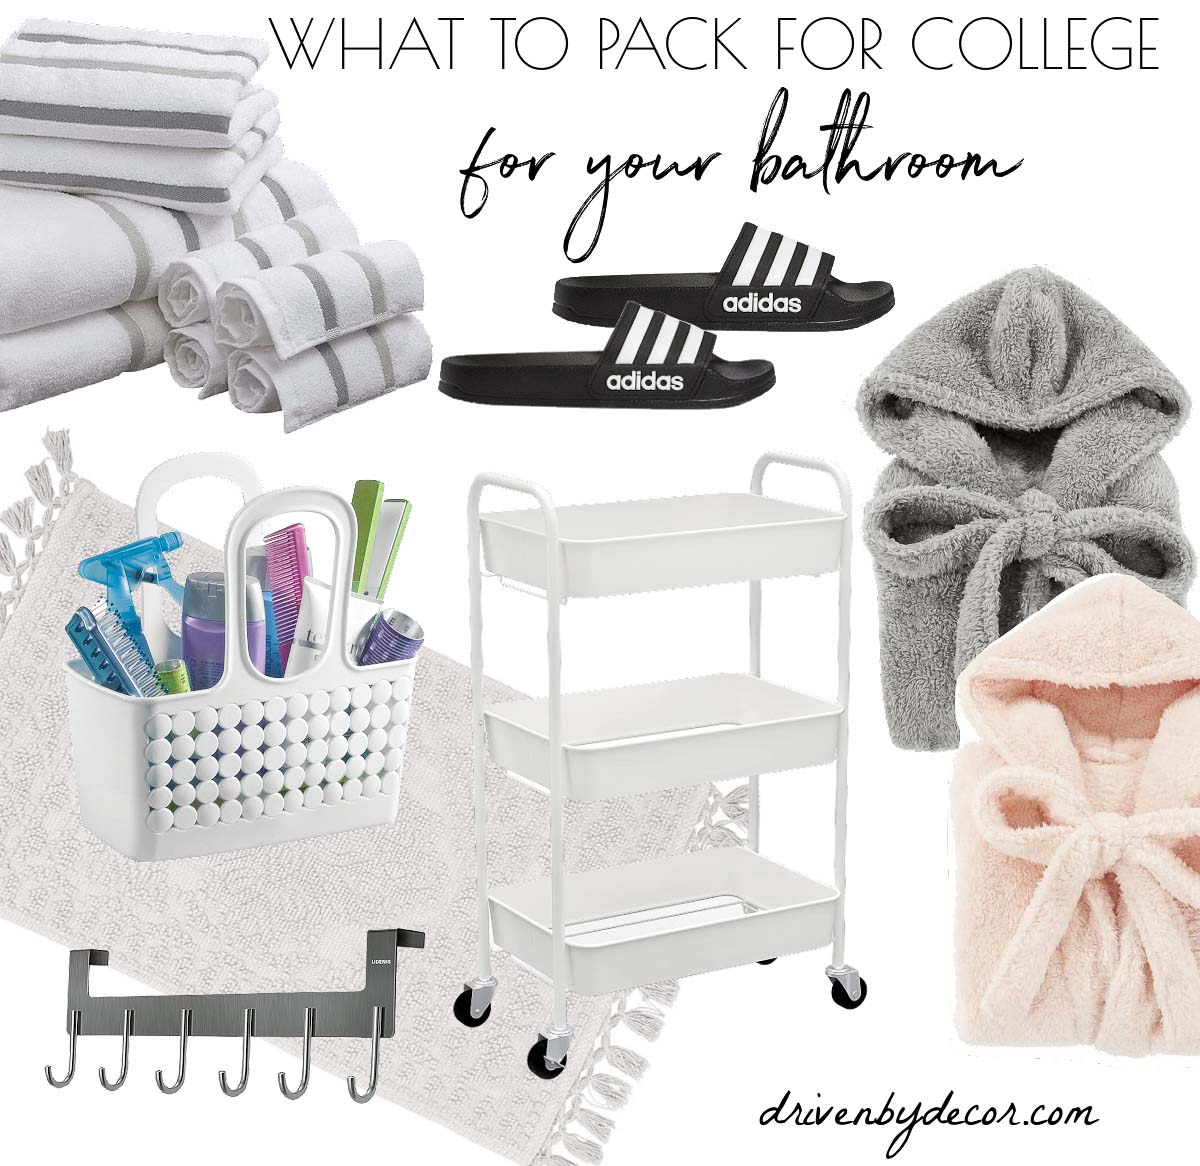 College packing list for your bathroom